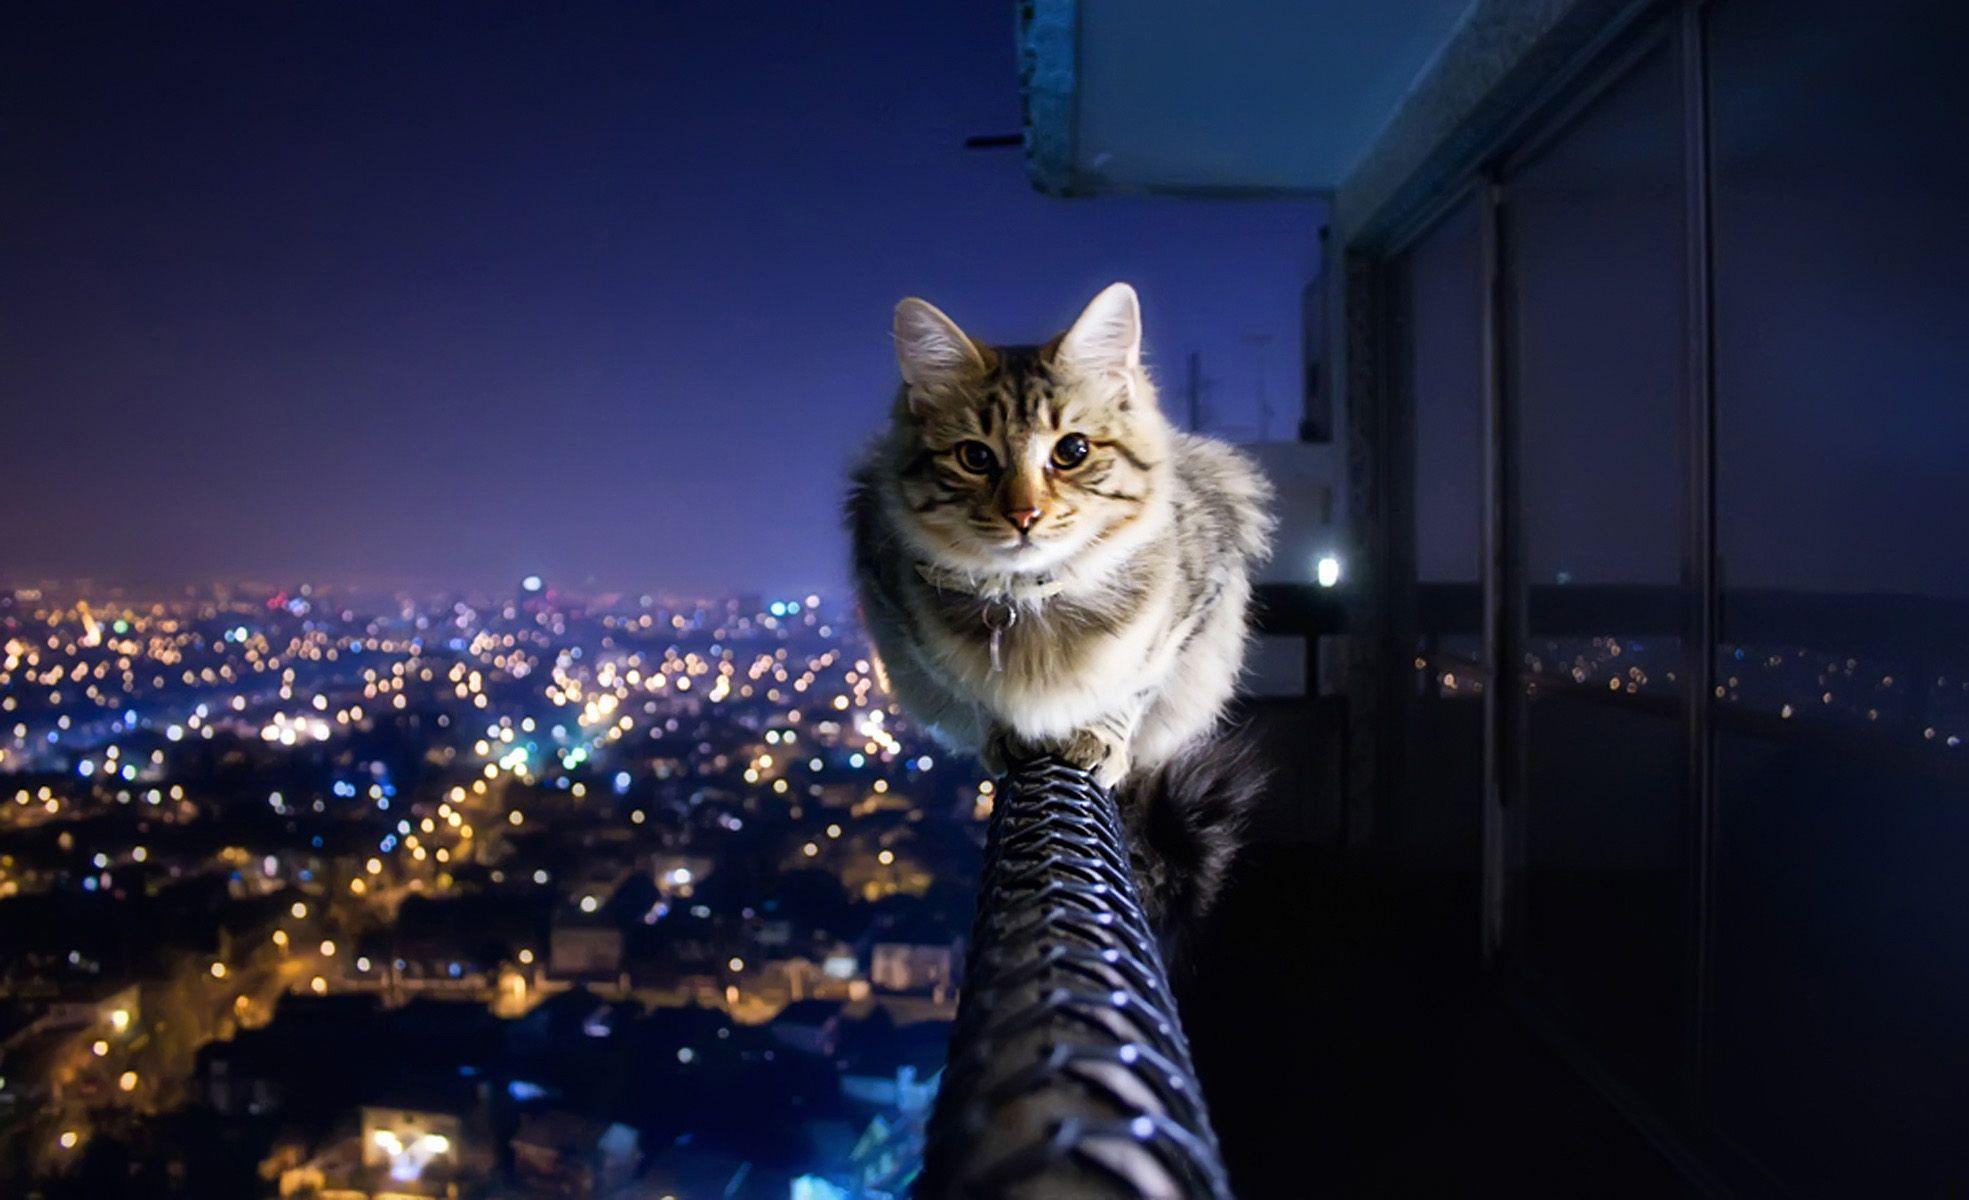 Hd Wallpapers Cityscape Cat And Cityscape Best Hd Wallpapers Desktop